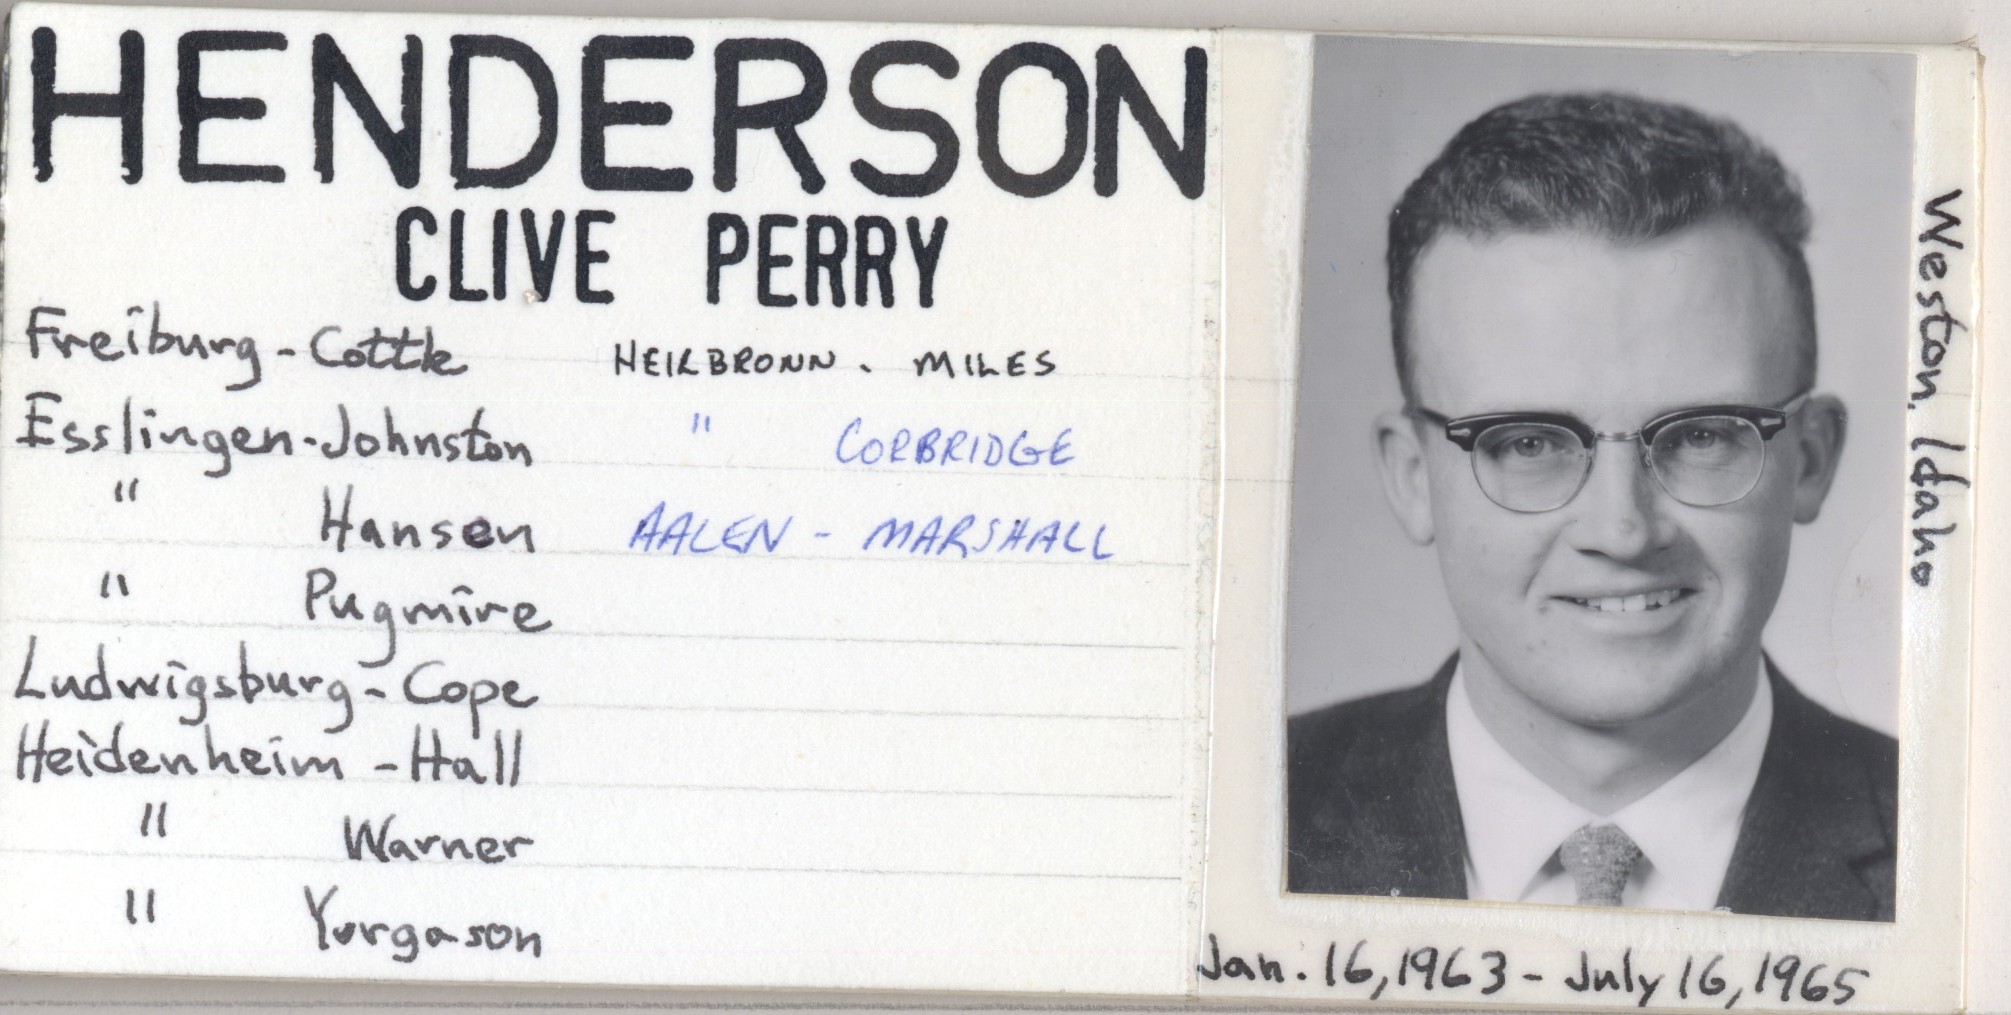 Henderson, Clive Perry